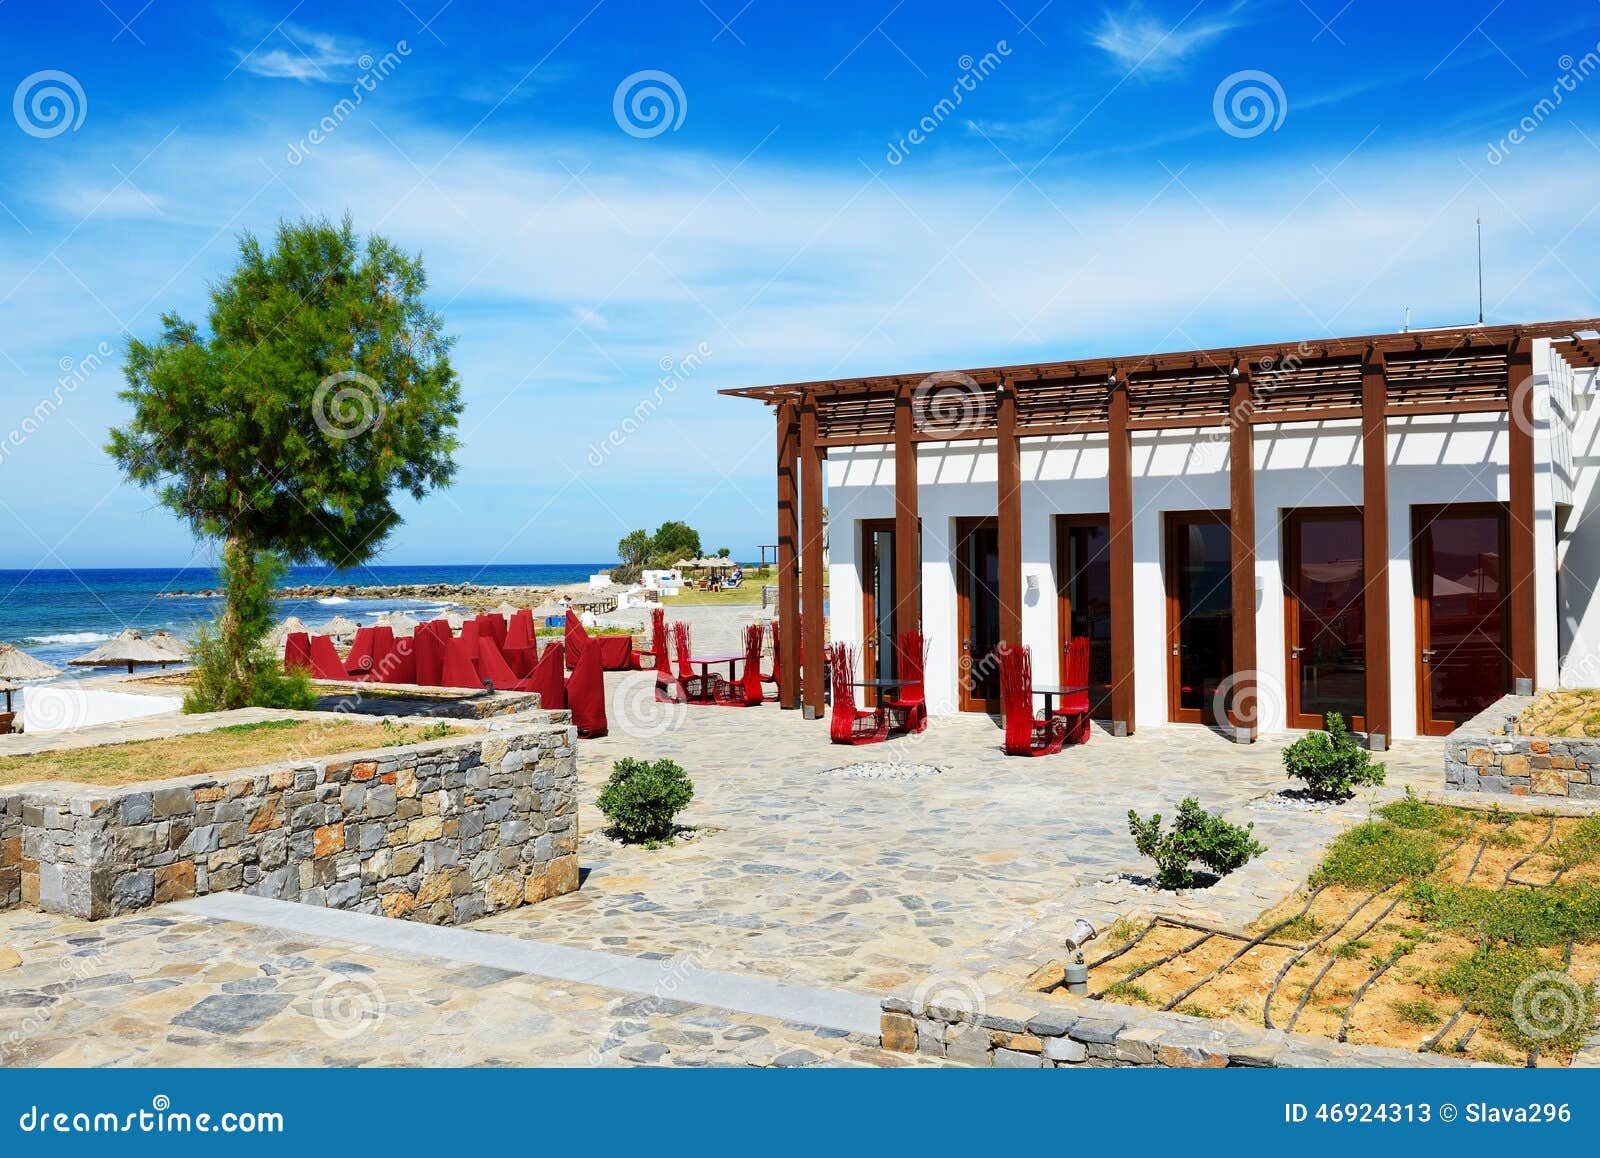 The Outdoor Restaurant Near Beach at Luxury Hotel Stock Image - Image